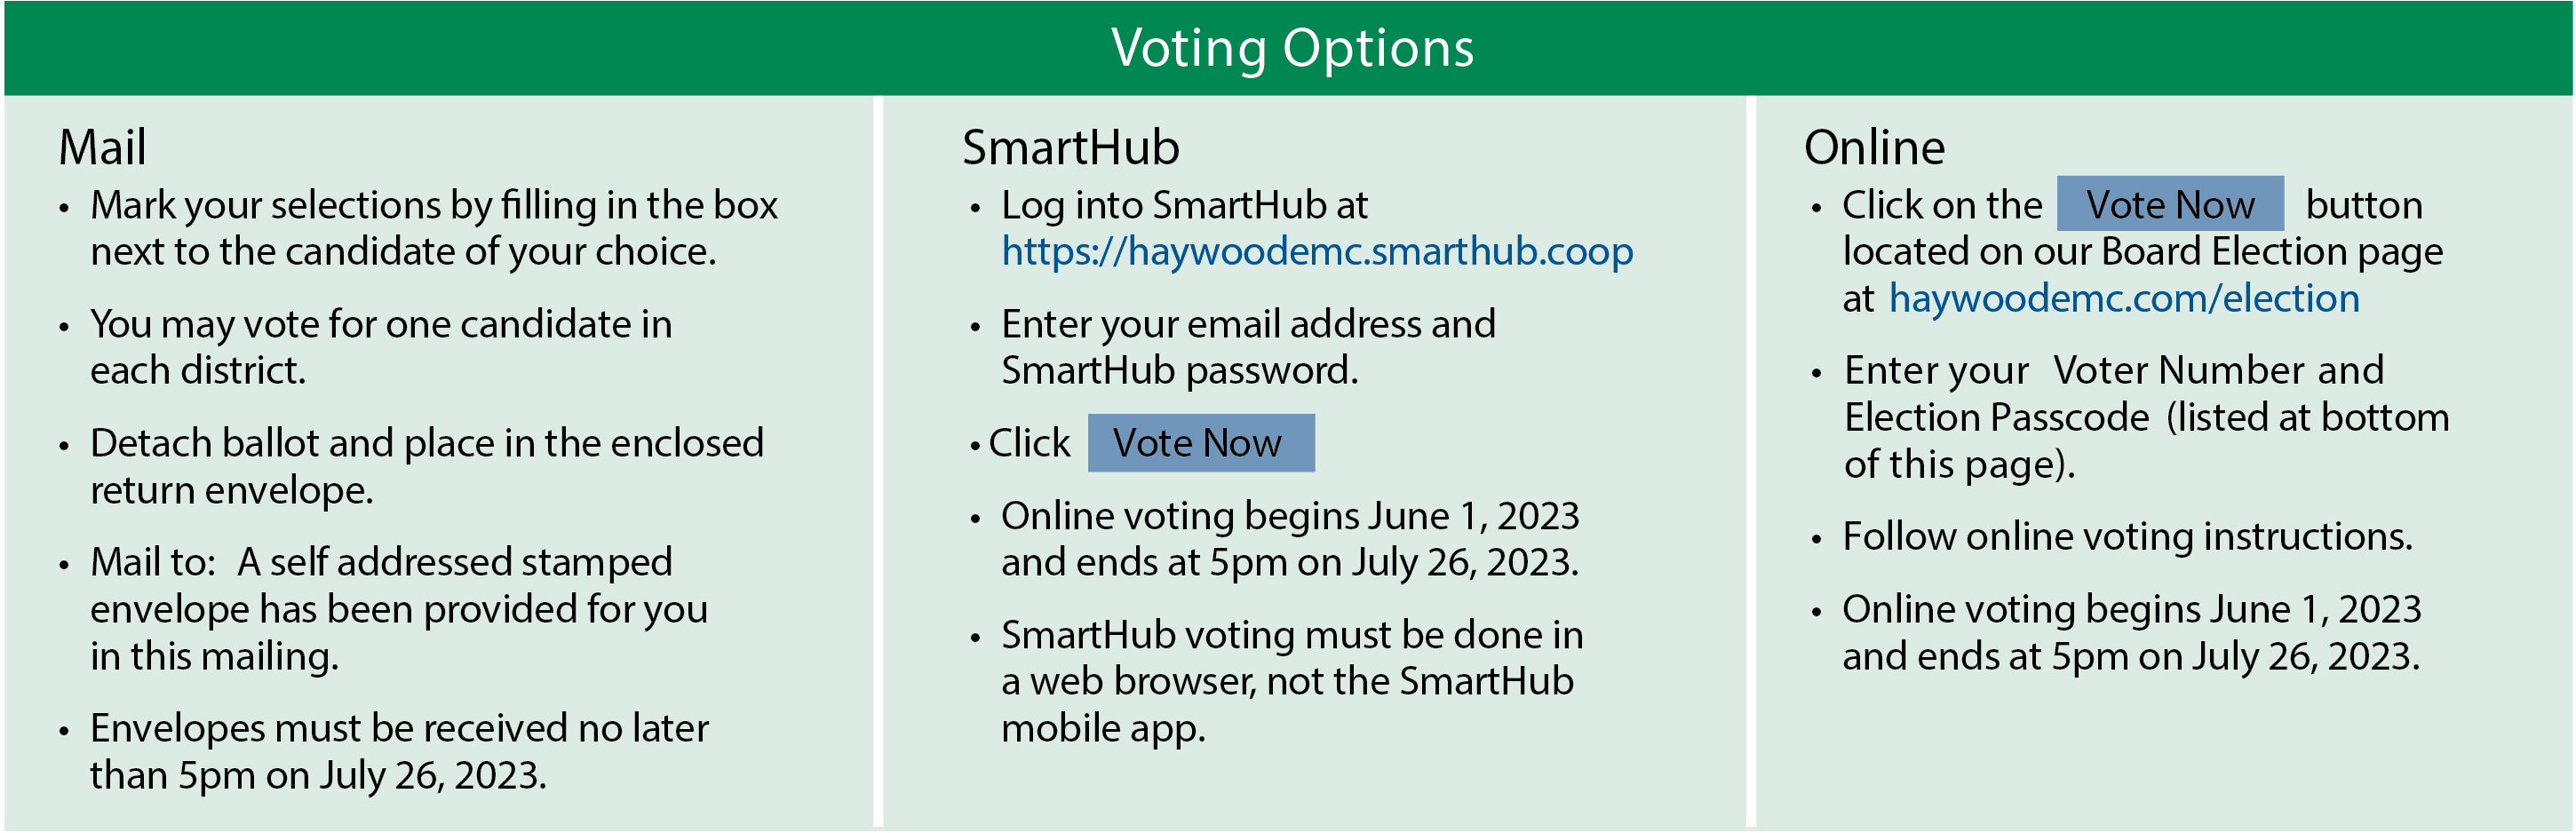 "Voting Instructions"